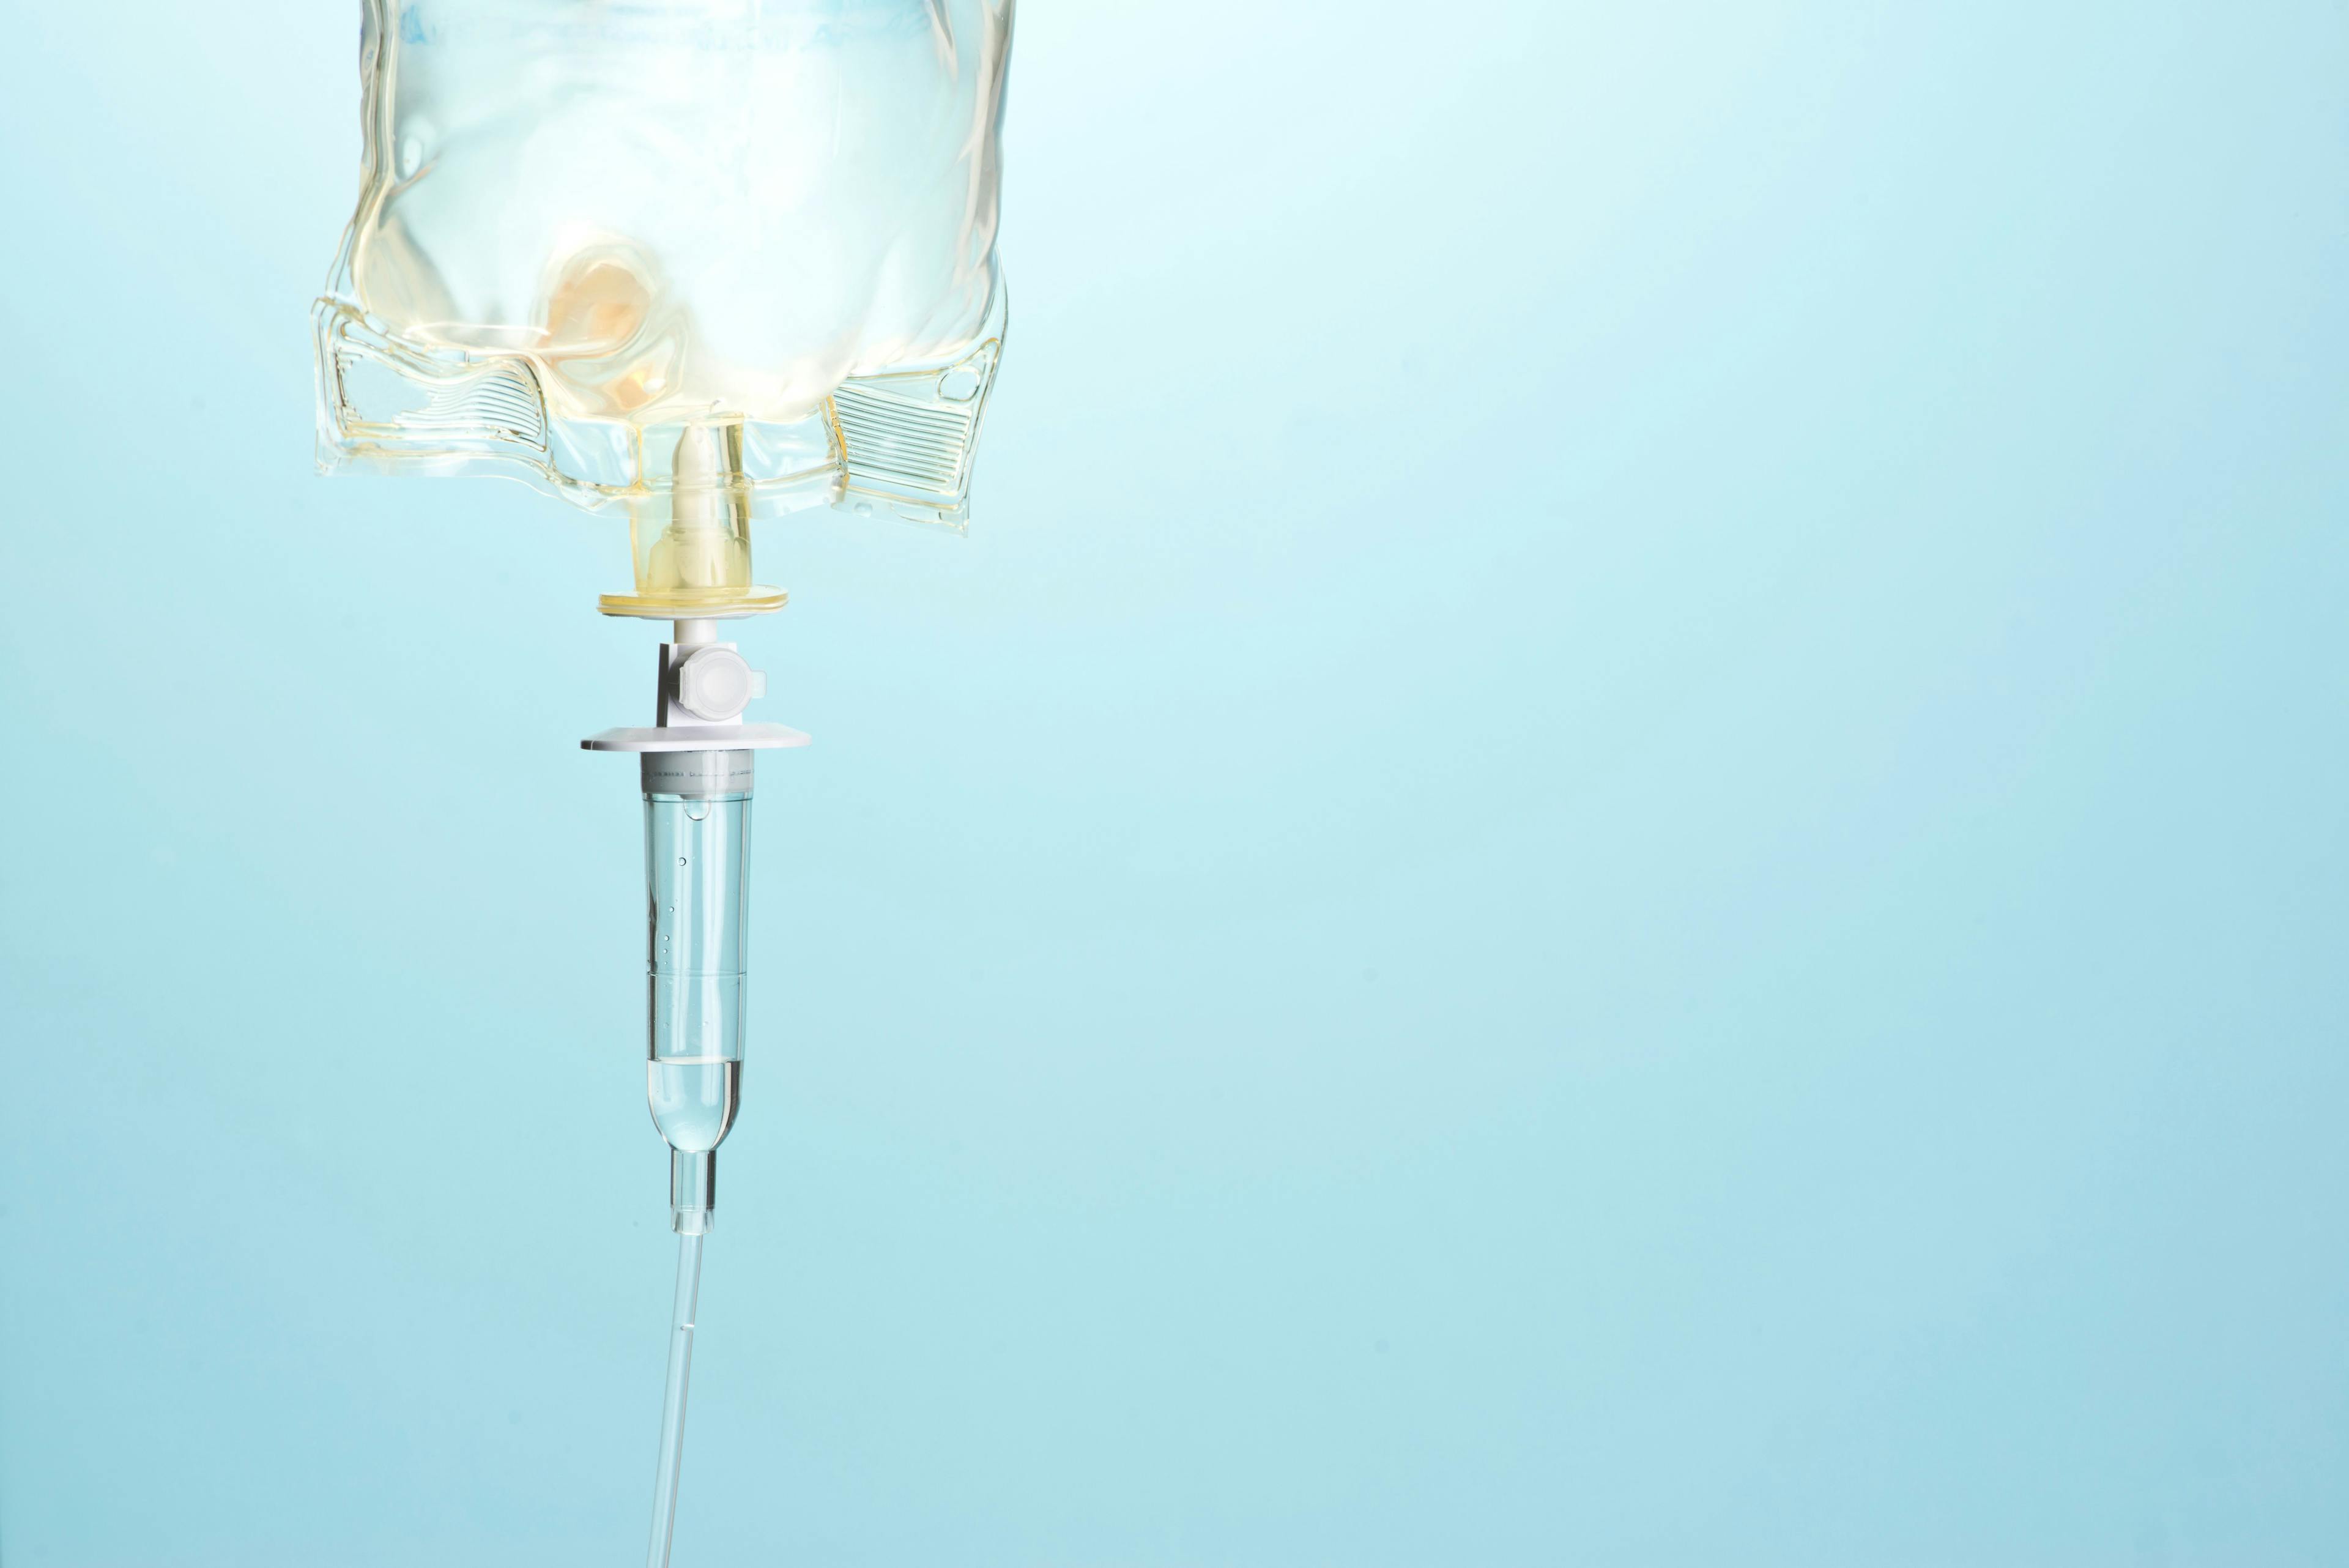 IV Bag Drip Intravenous medication for hospital use | Image Credit: Sherry Young - stock.adobe.com